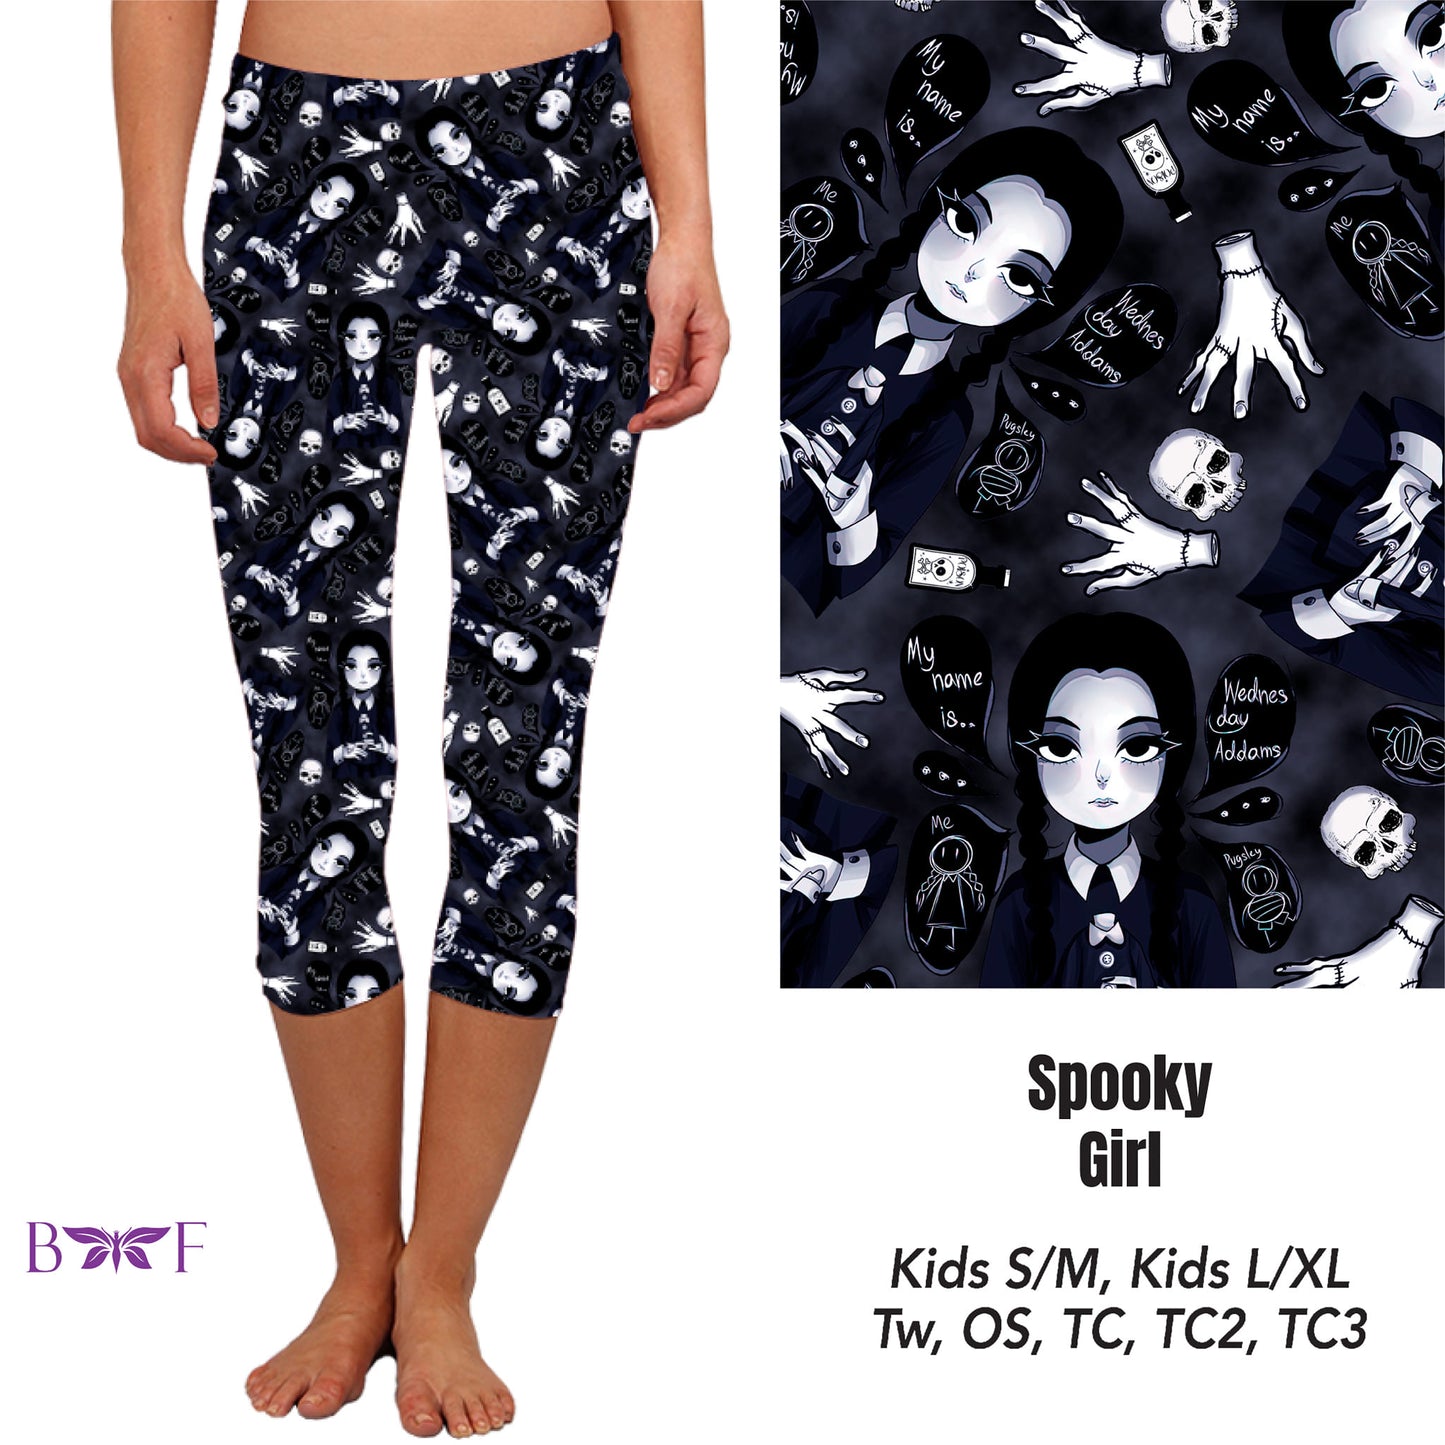 Spooky Girl Leggings with pockets